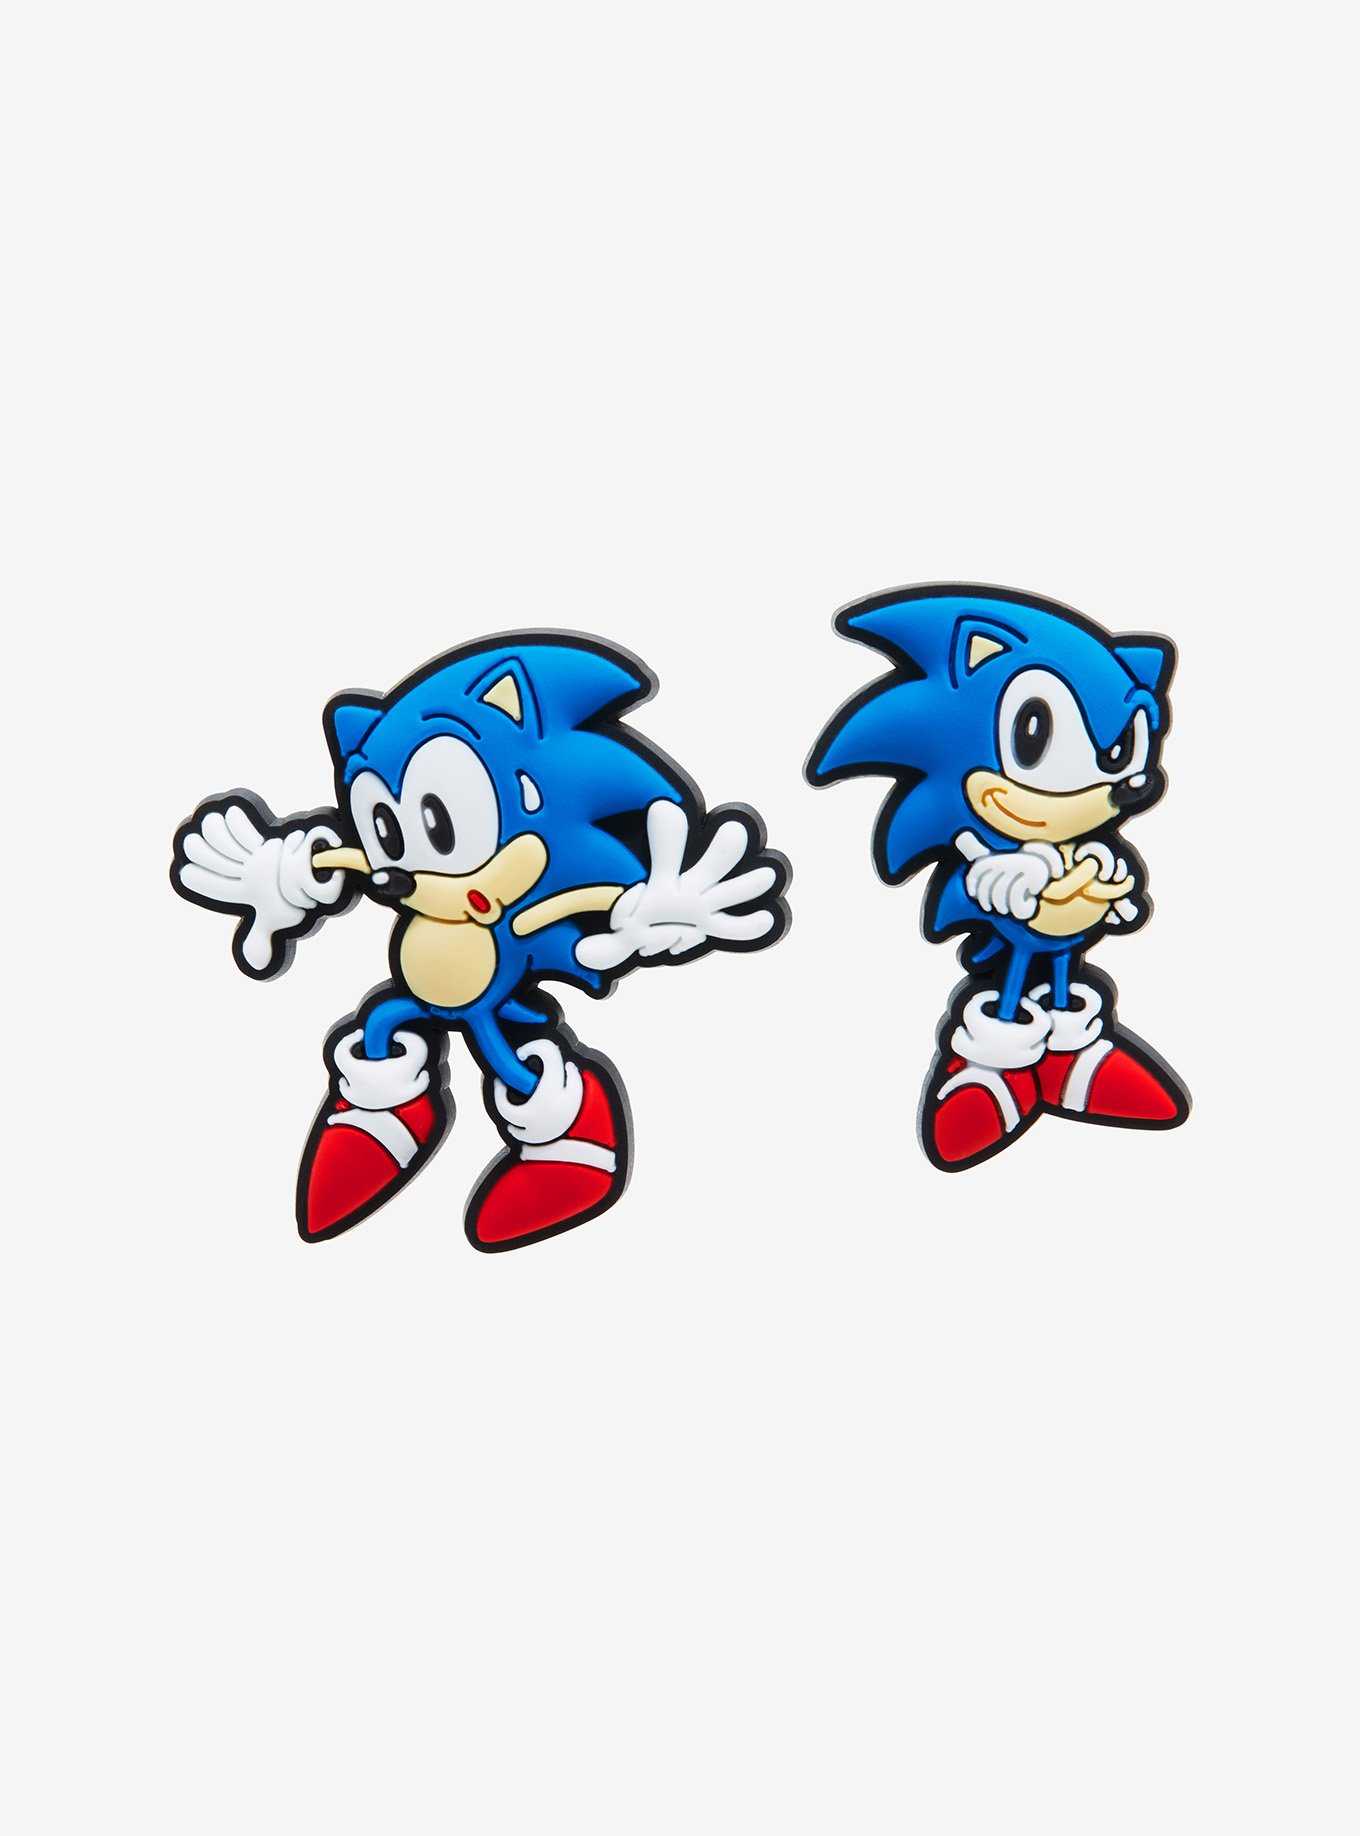 Pin by Sonic games on Sonic x universe